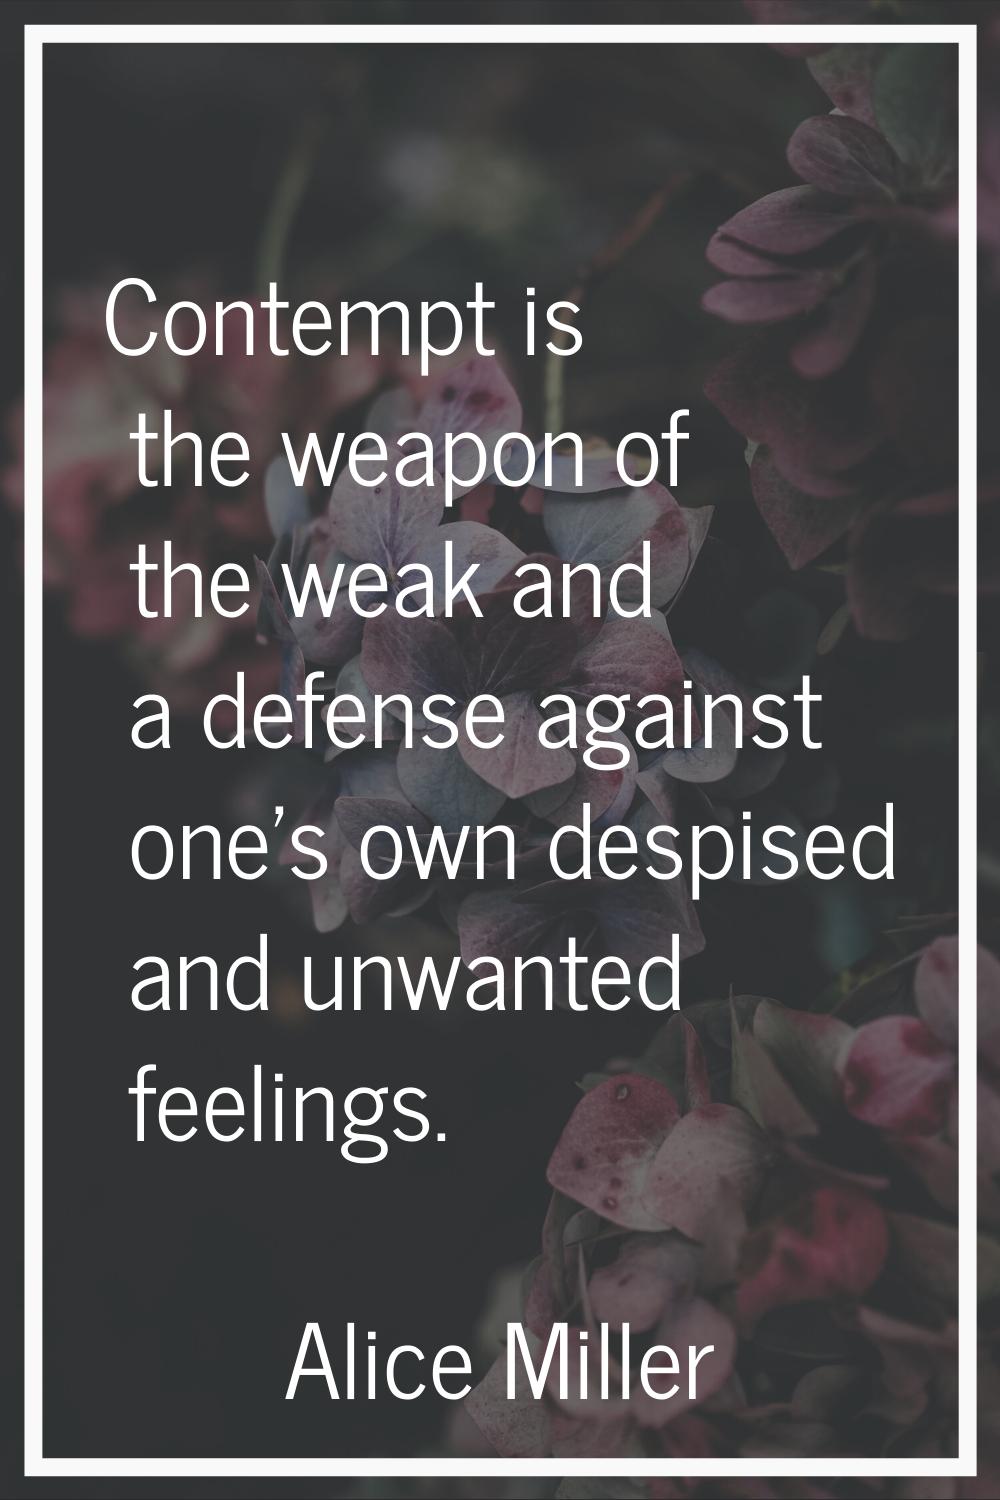 Contempt is the weapon of the weak and a defense against one's own despised and unwanted feelings.